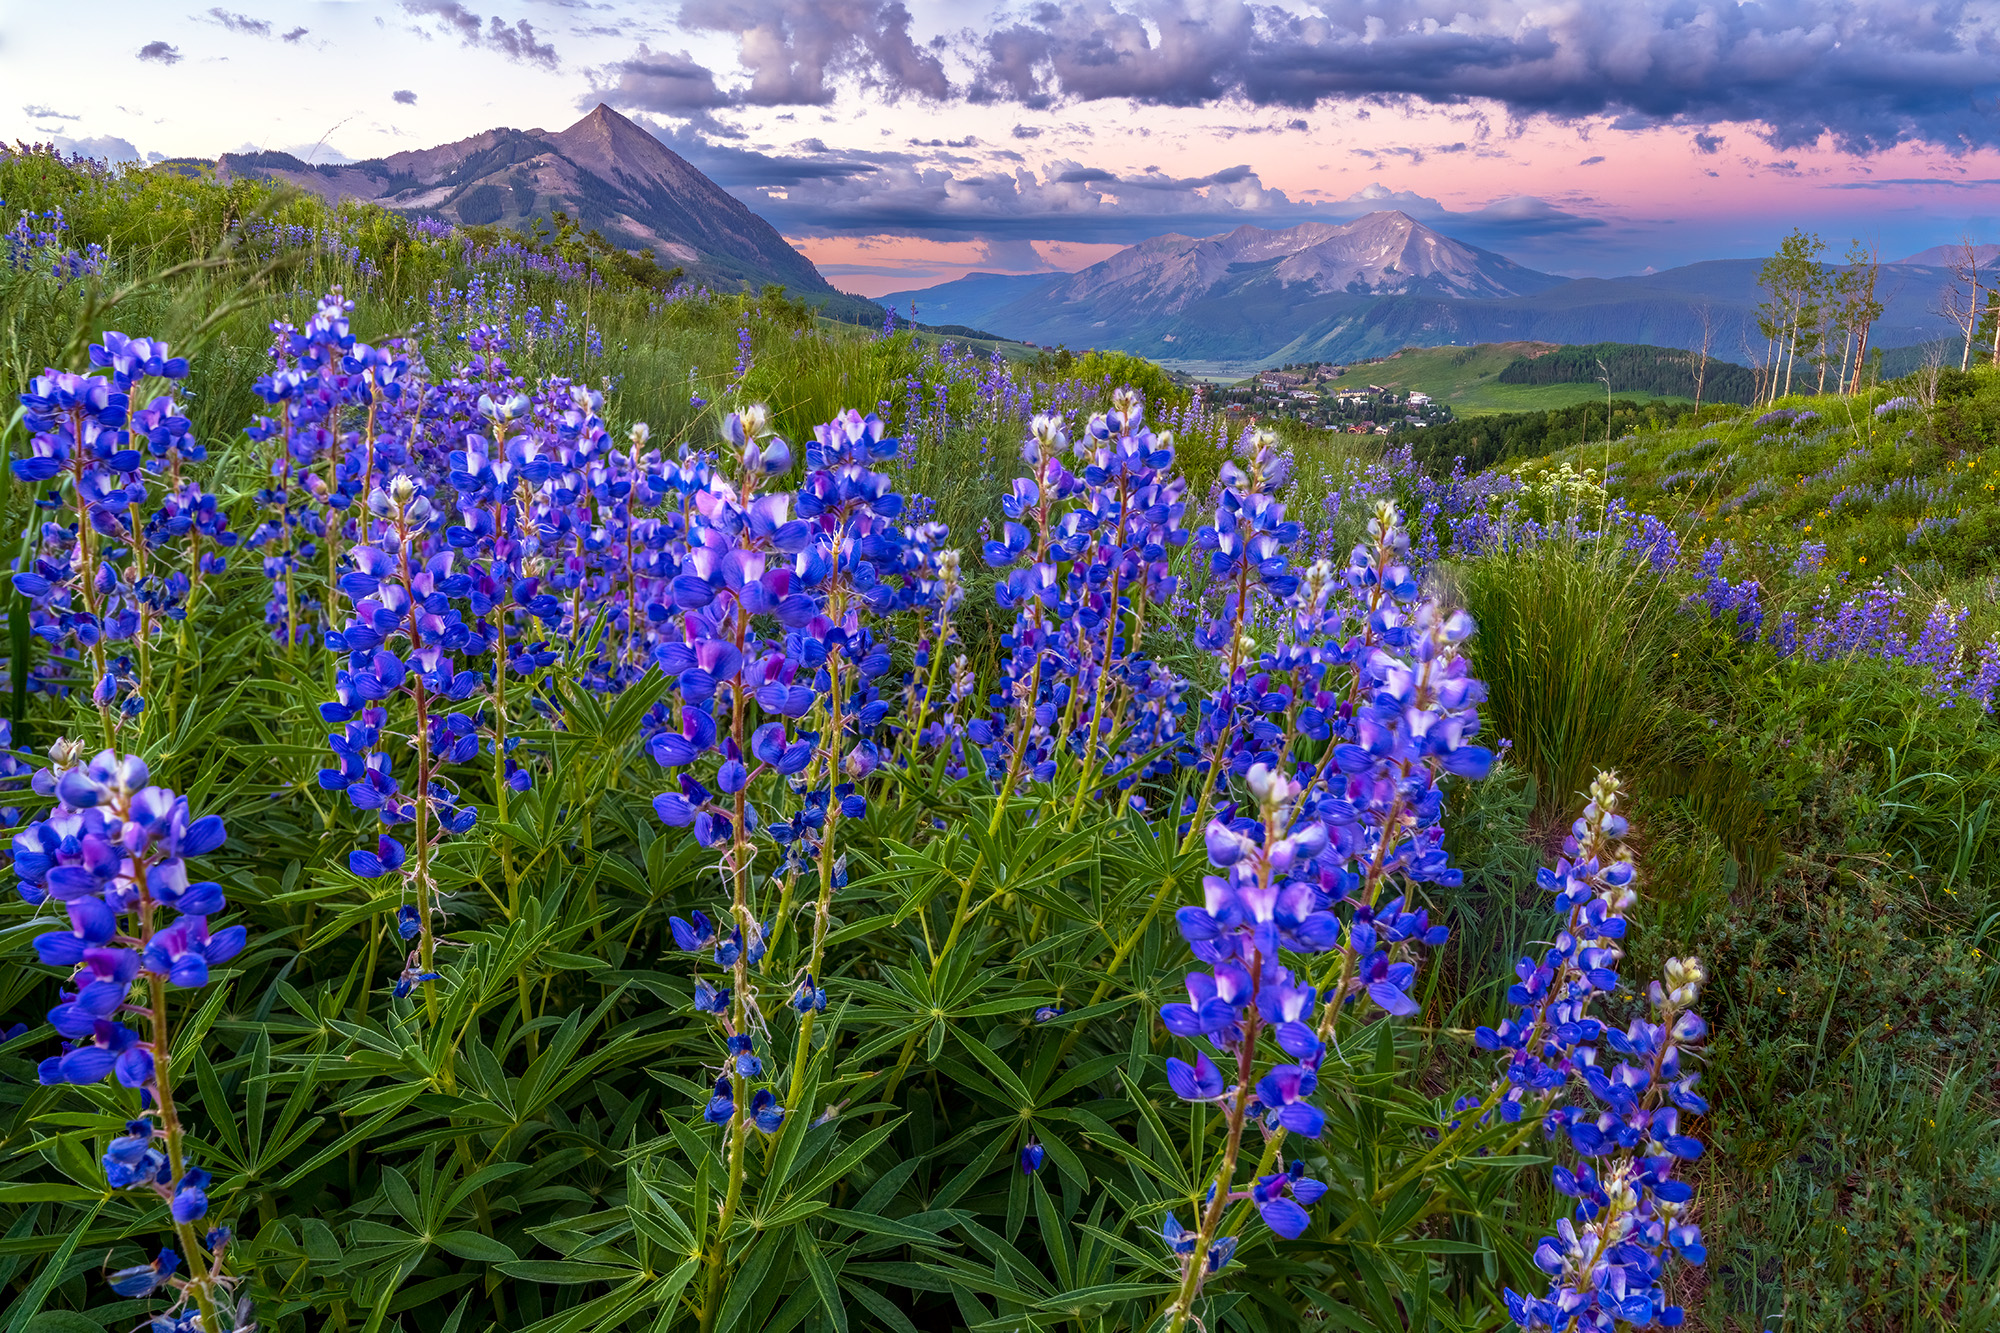 As the sun painted the Colorado sky with the first strokes of dawn, I ventured into the lupine fields of Crested Butte. With...